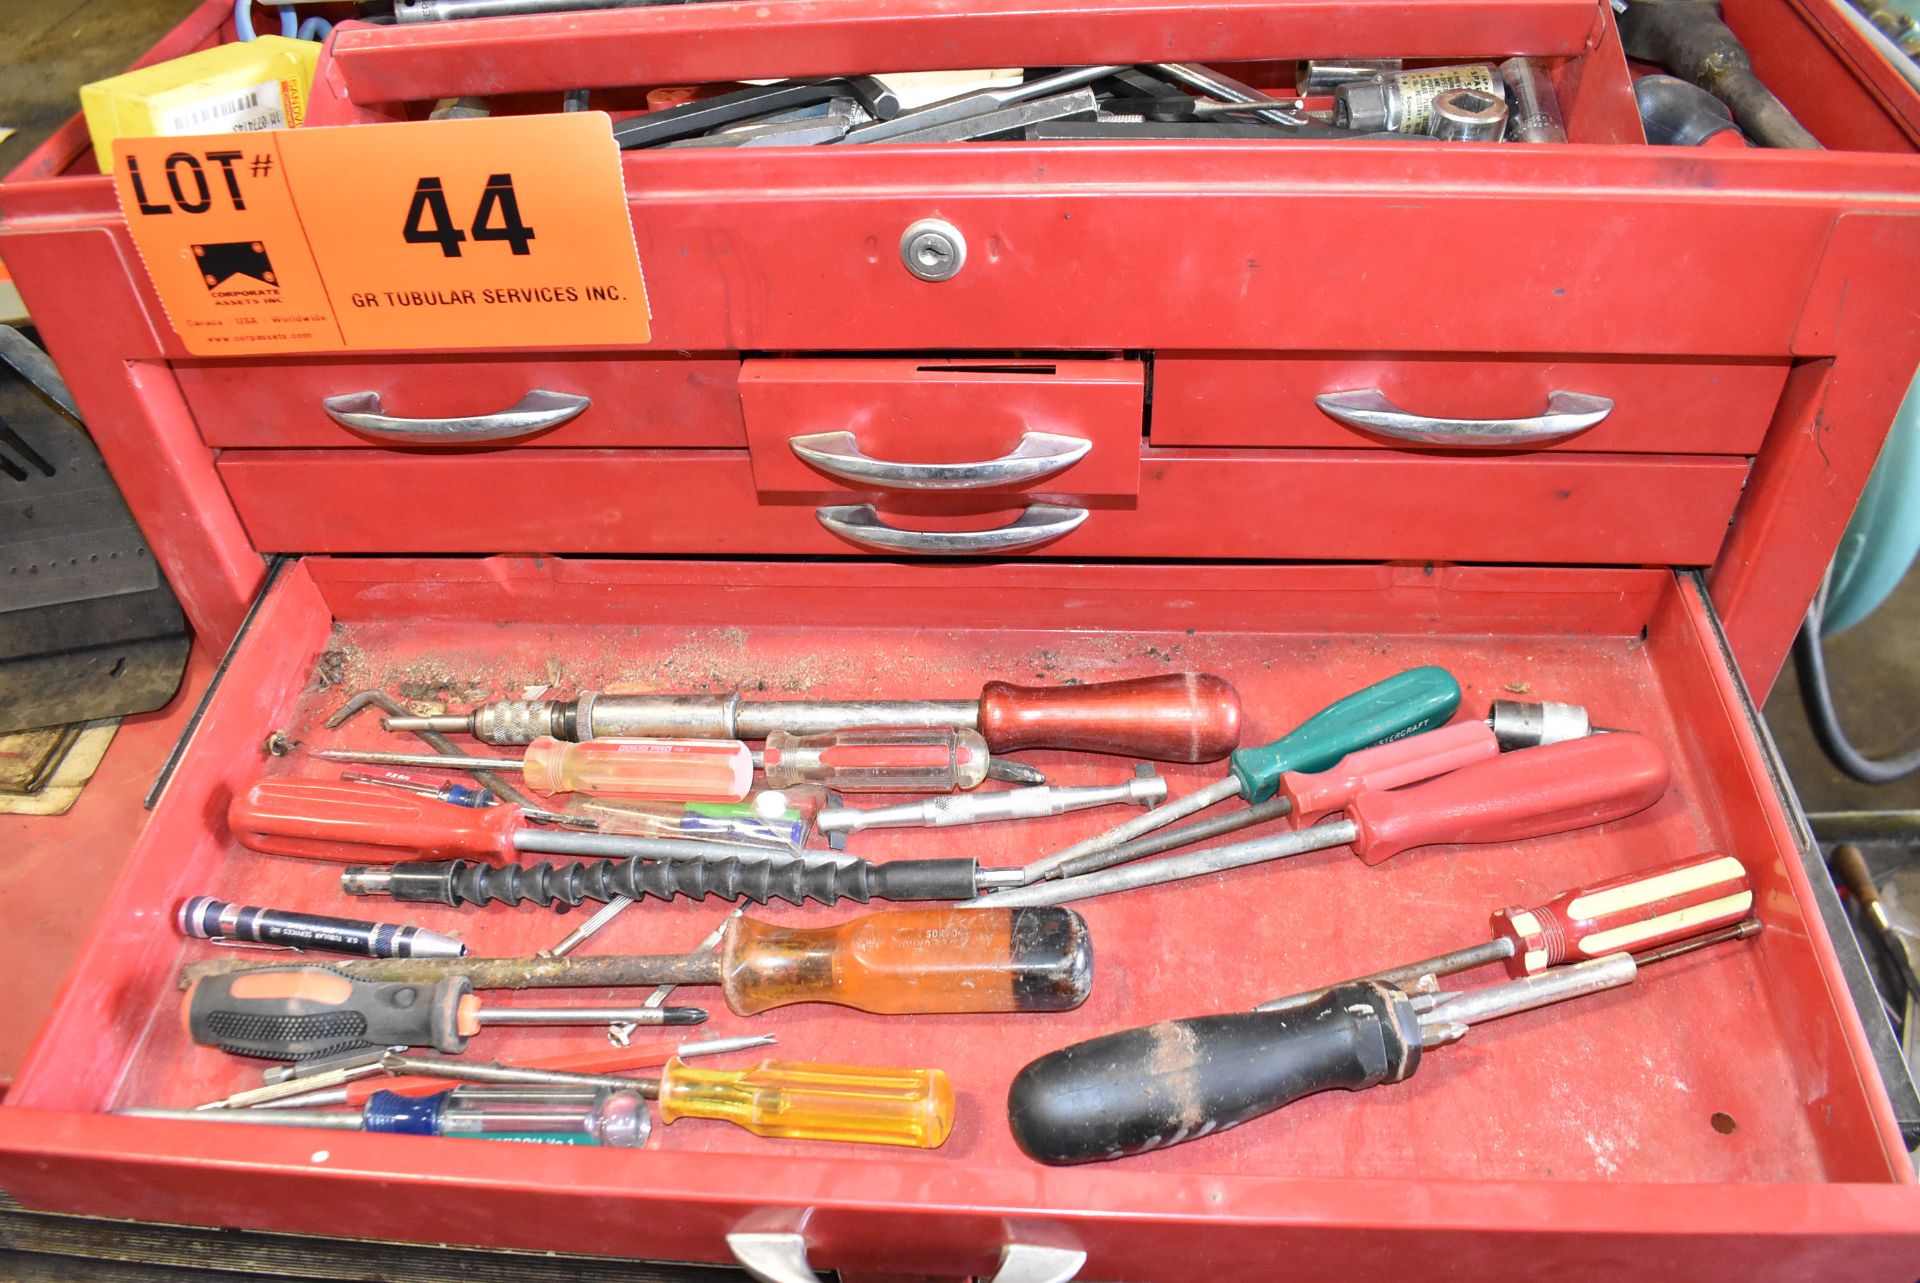 LOT/ CRAFTSMAN TOOL CABINET WITH CONTENTS CONSISTING OF HAND TOOLS - Image 5 of 16